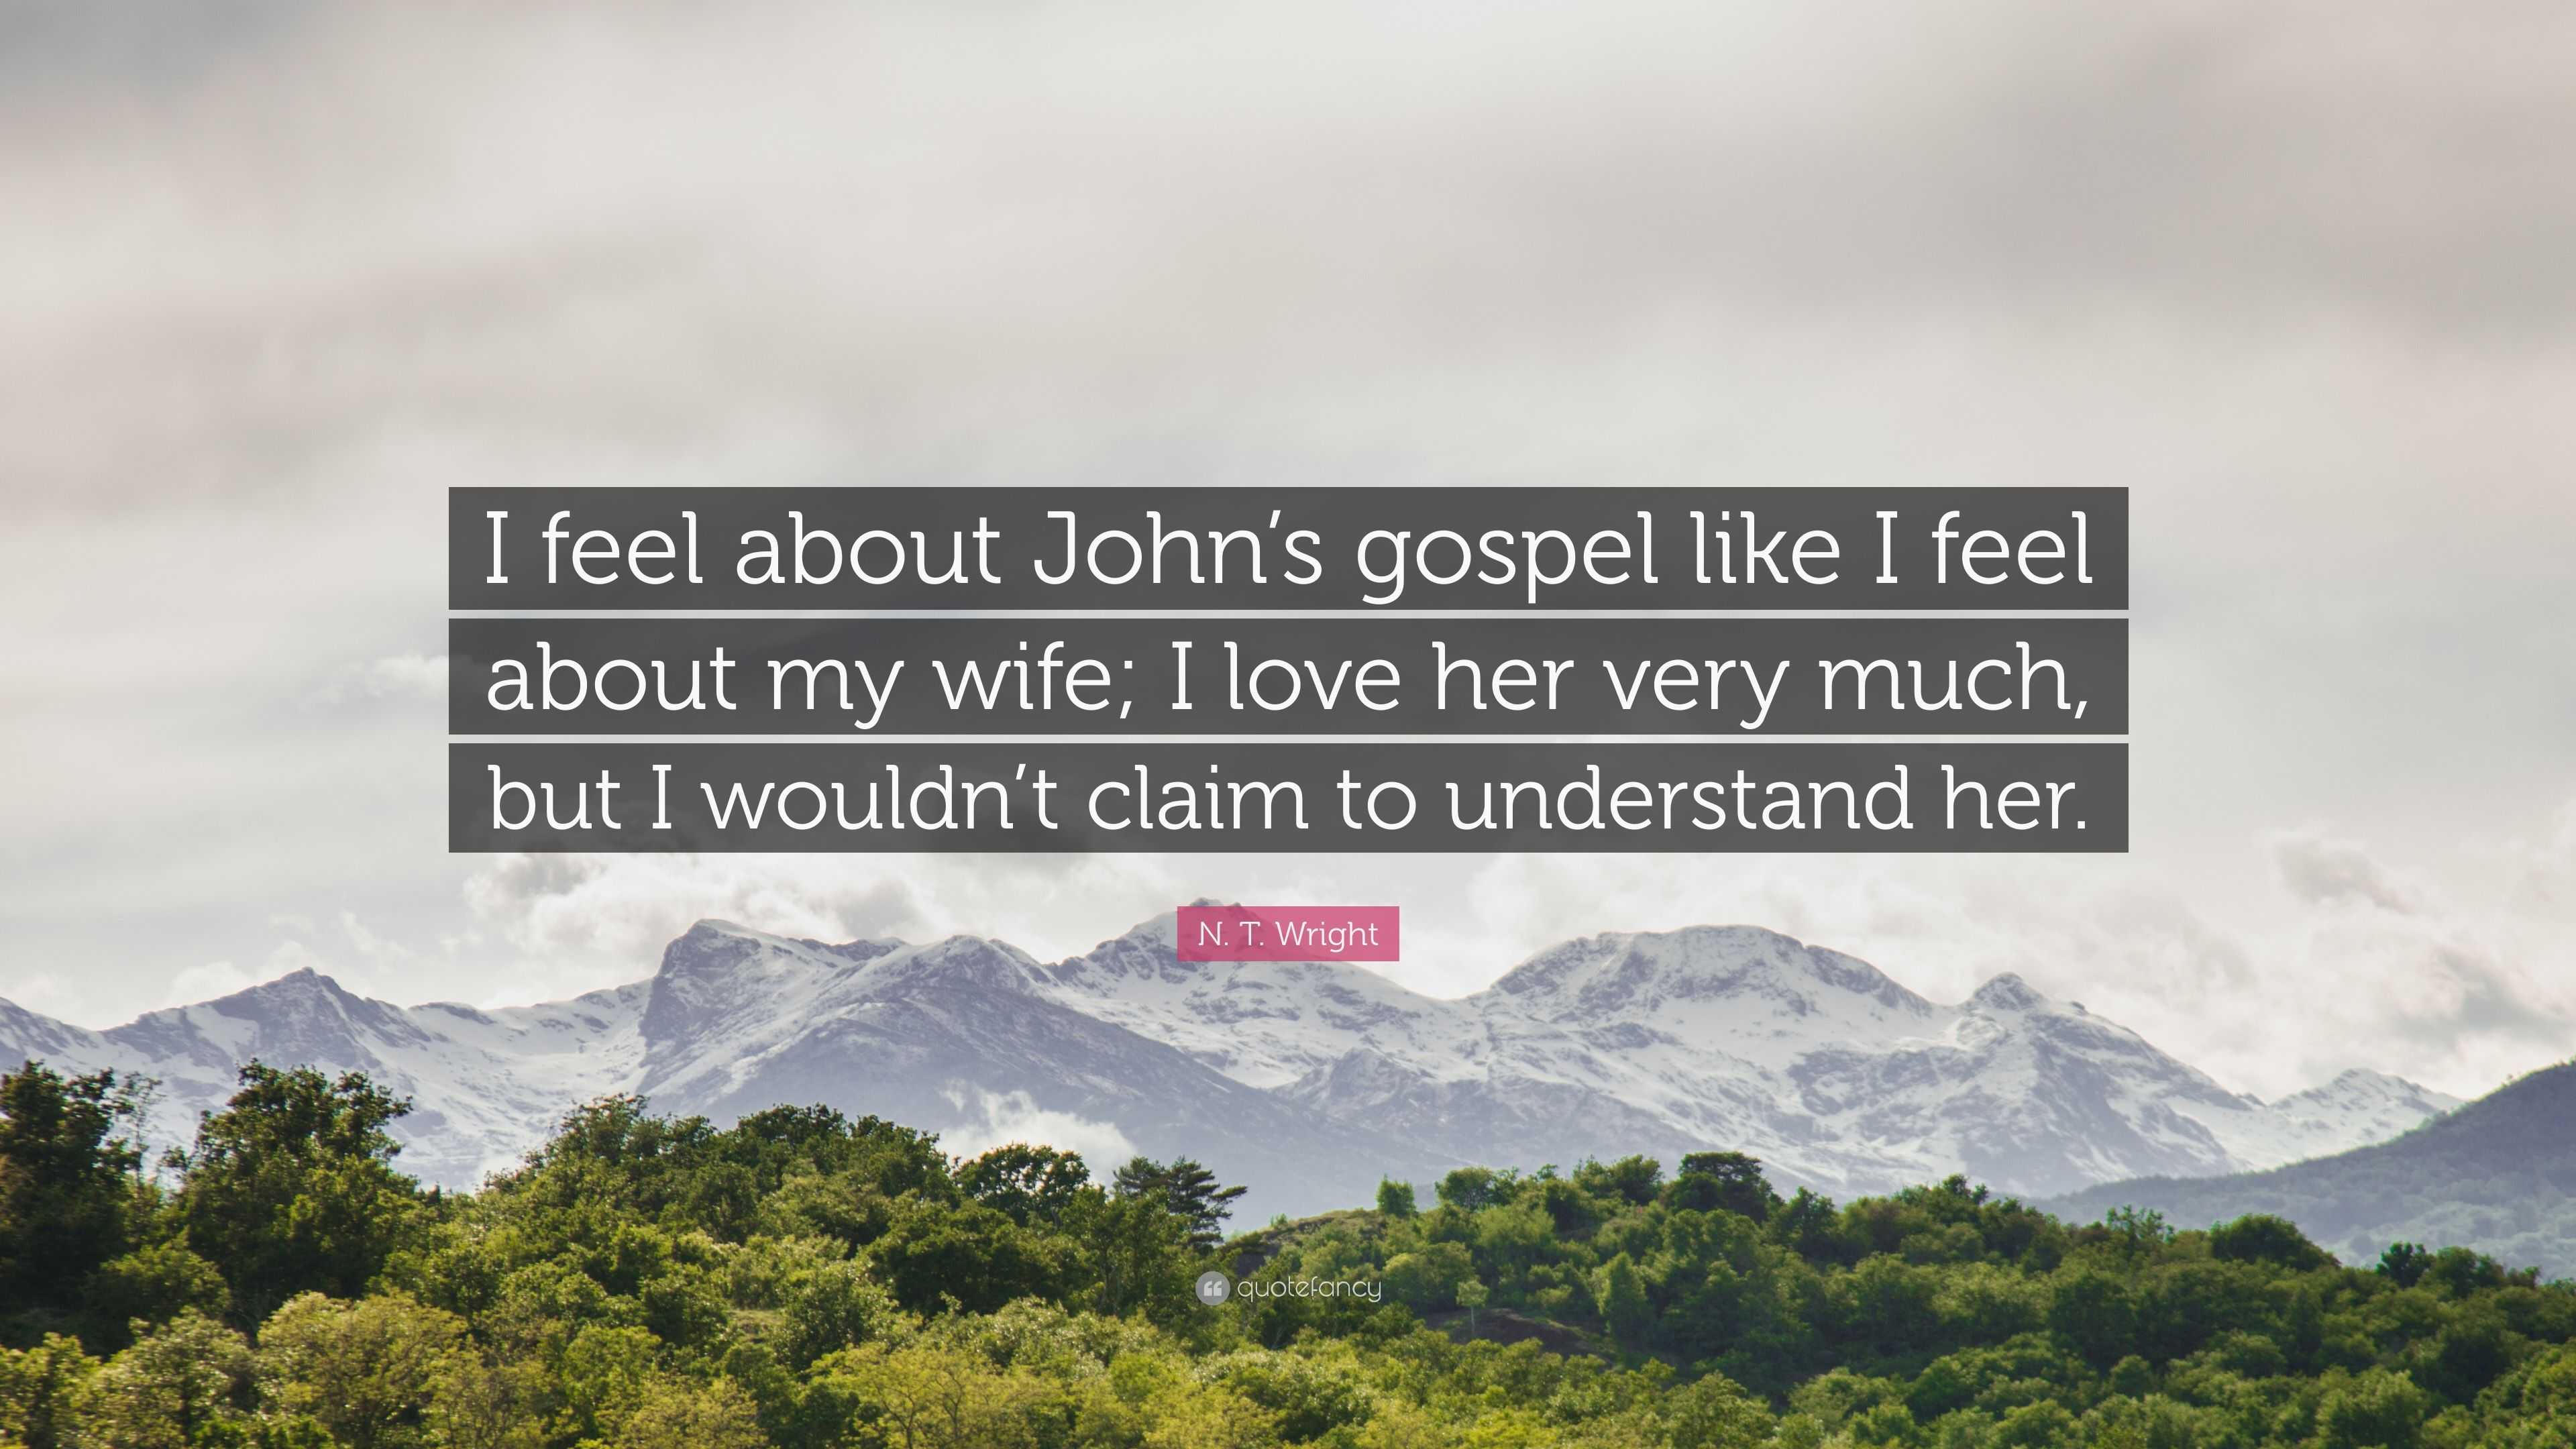 N T Wright Quote “I feel about John s gospel like I feel about my wife